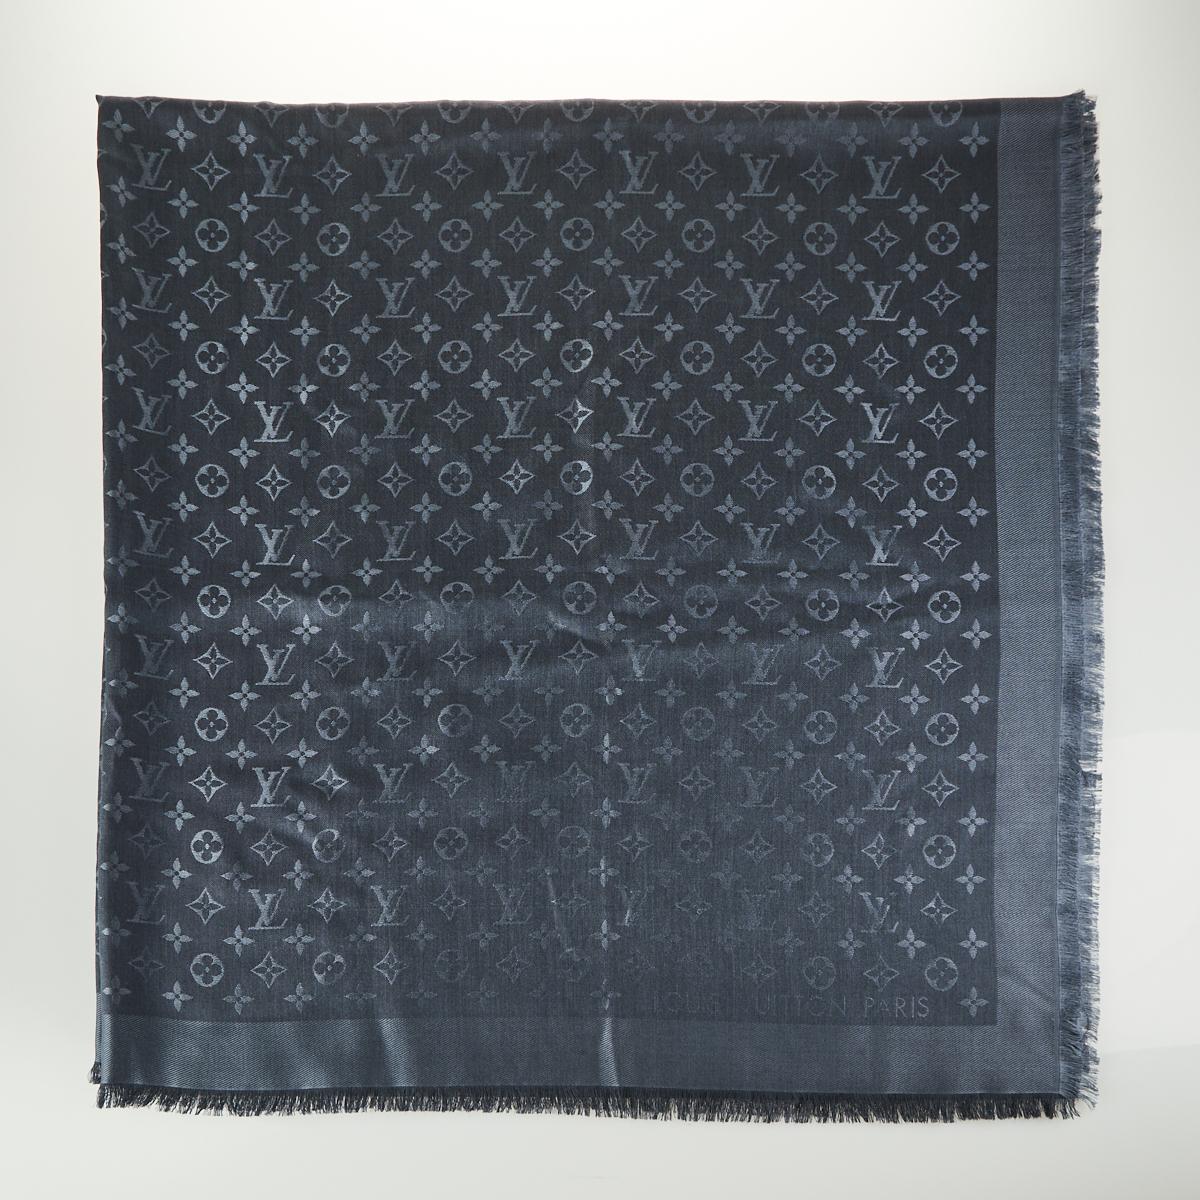 Sold at Auction: AUTHENTIC LOUIS VUITTON 60% SILK,40% WOOL SCARF